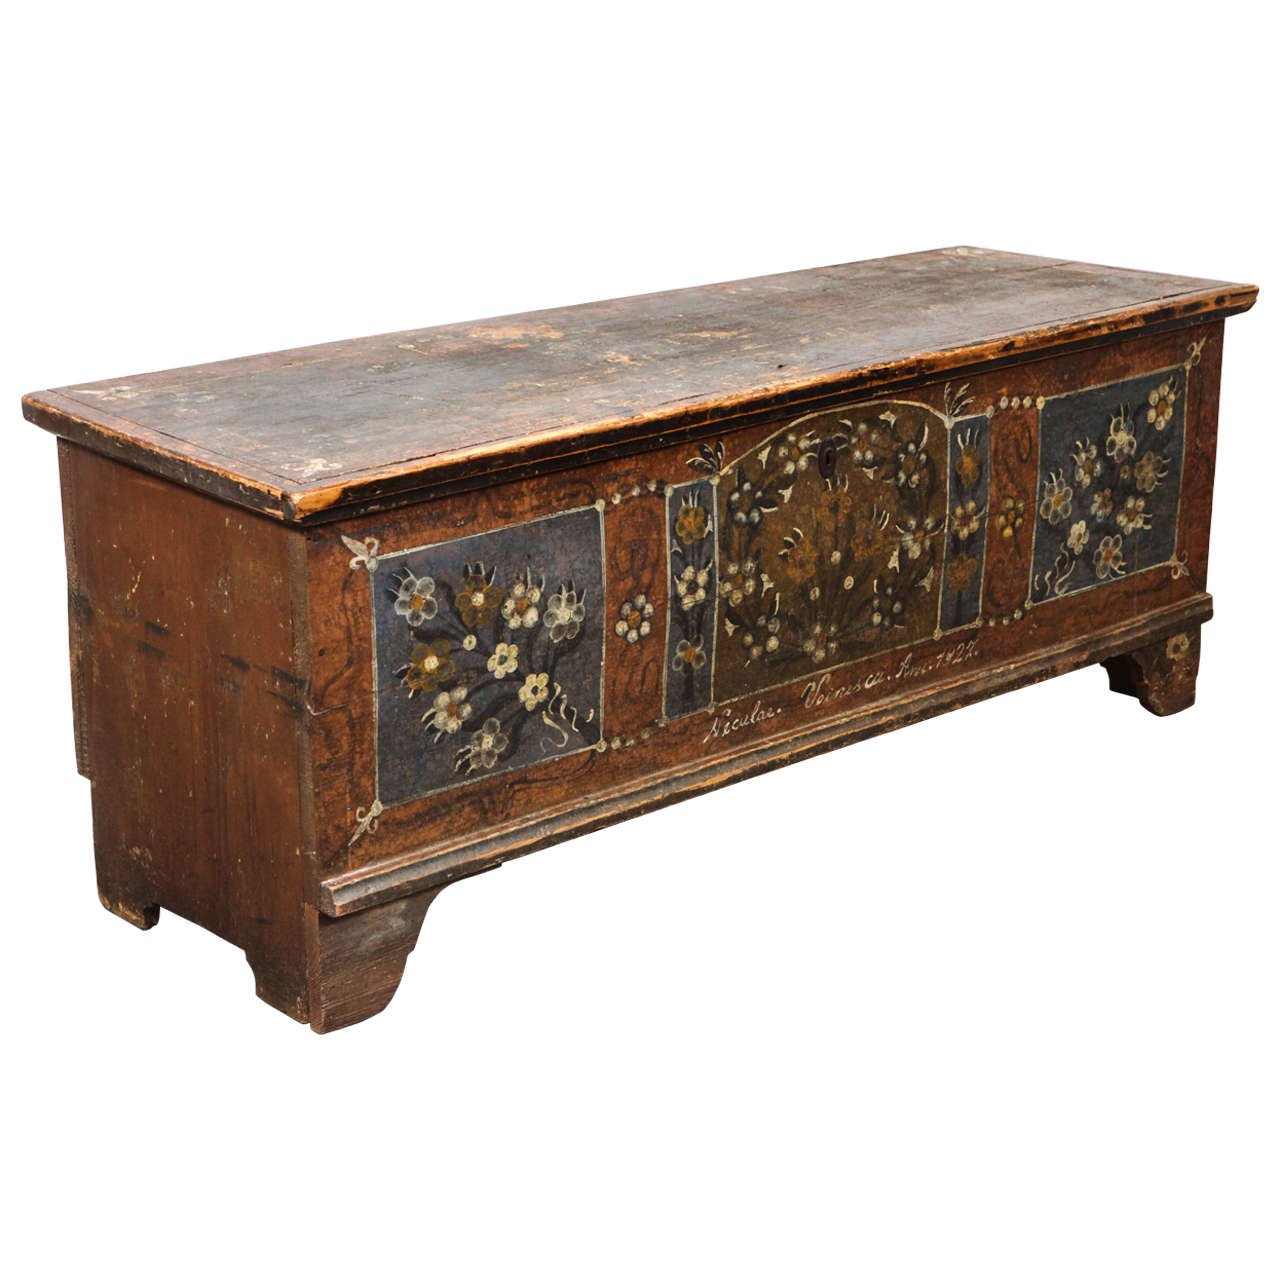 Rustic Vintage Hand Painted Trunk with Flower Details